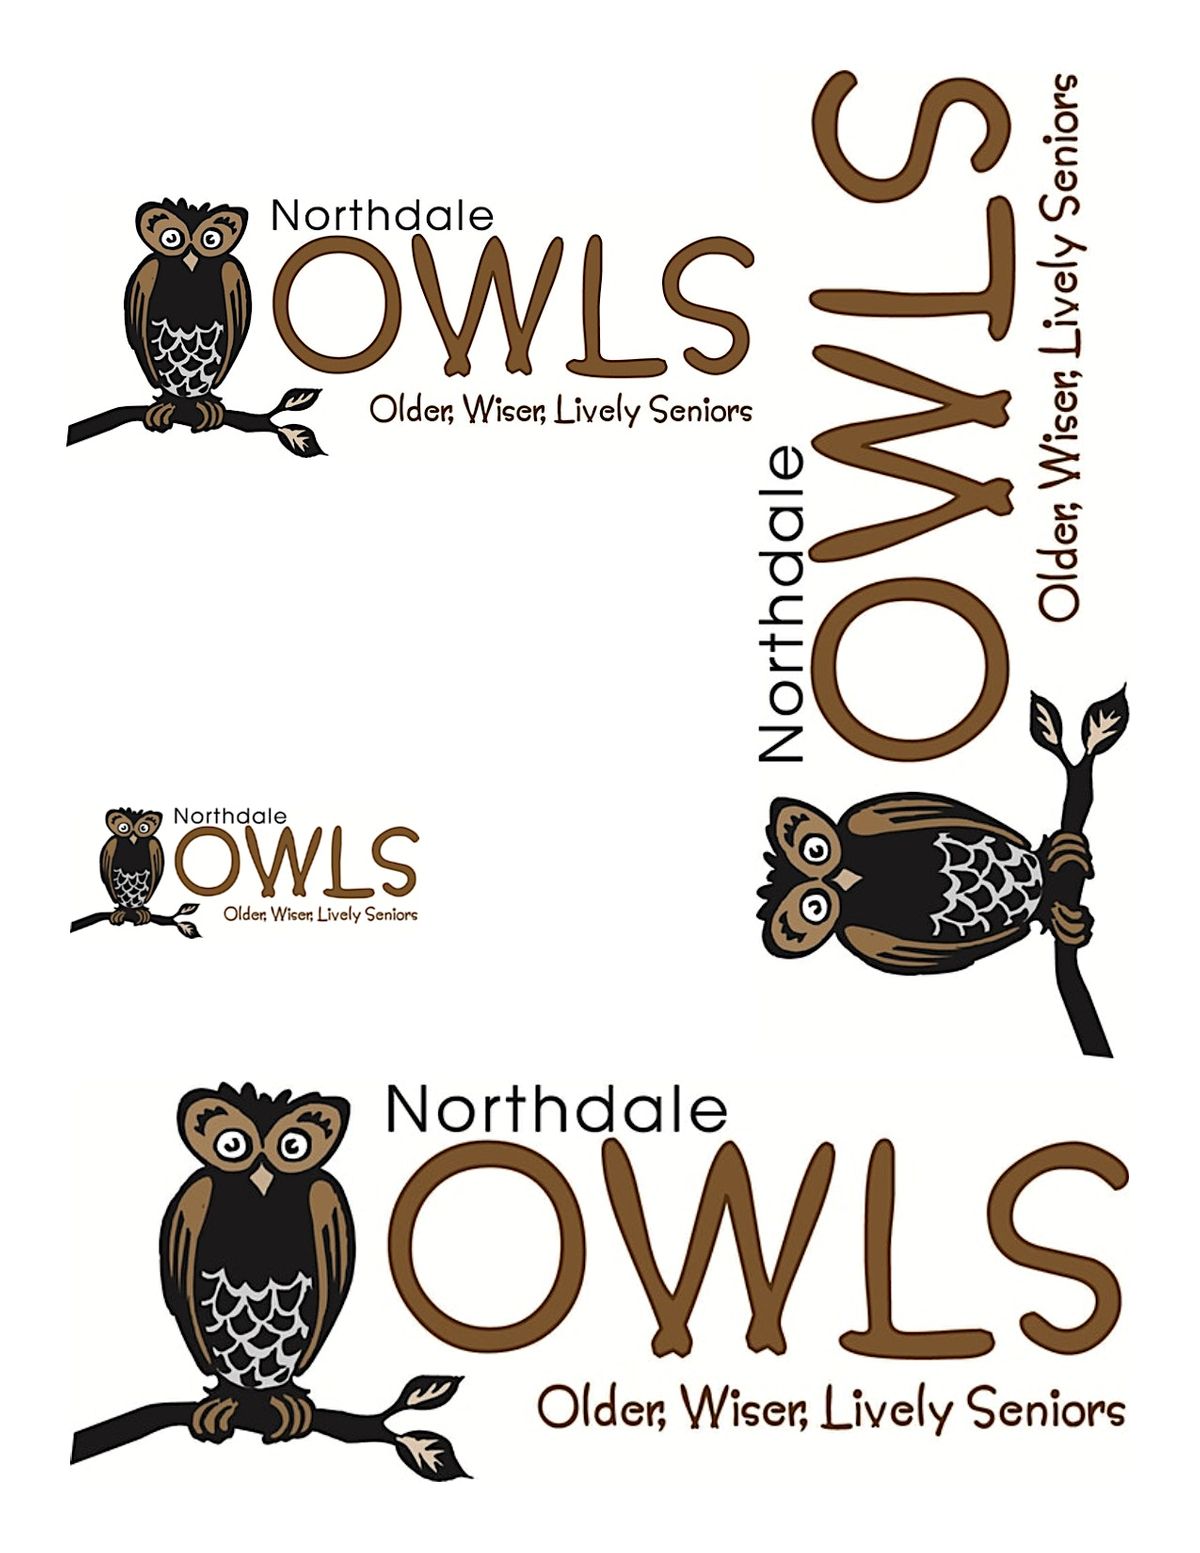 Northdale Owls Vendor Consecutive Meetings Payment 2022